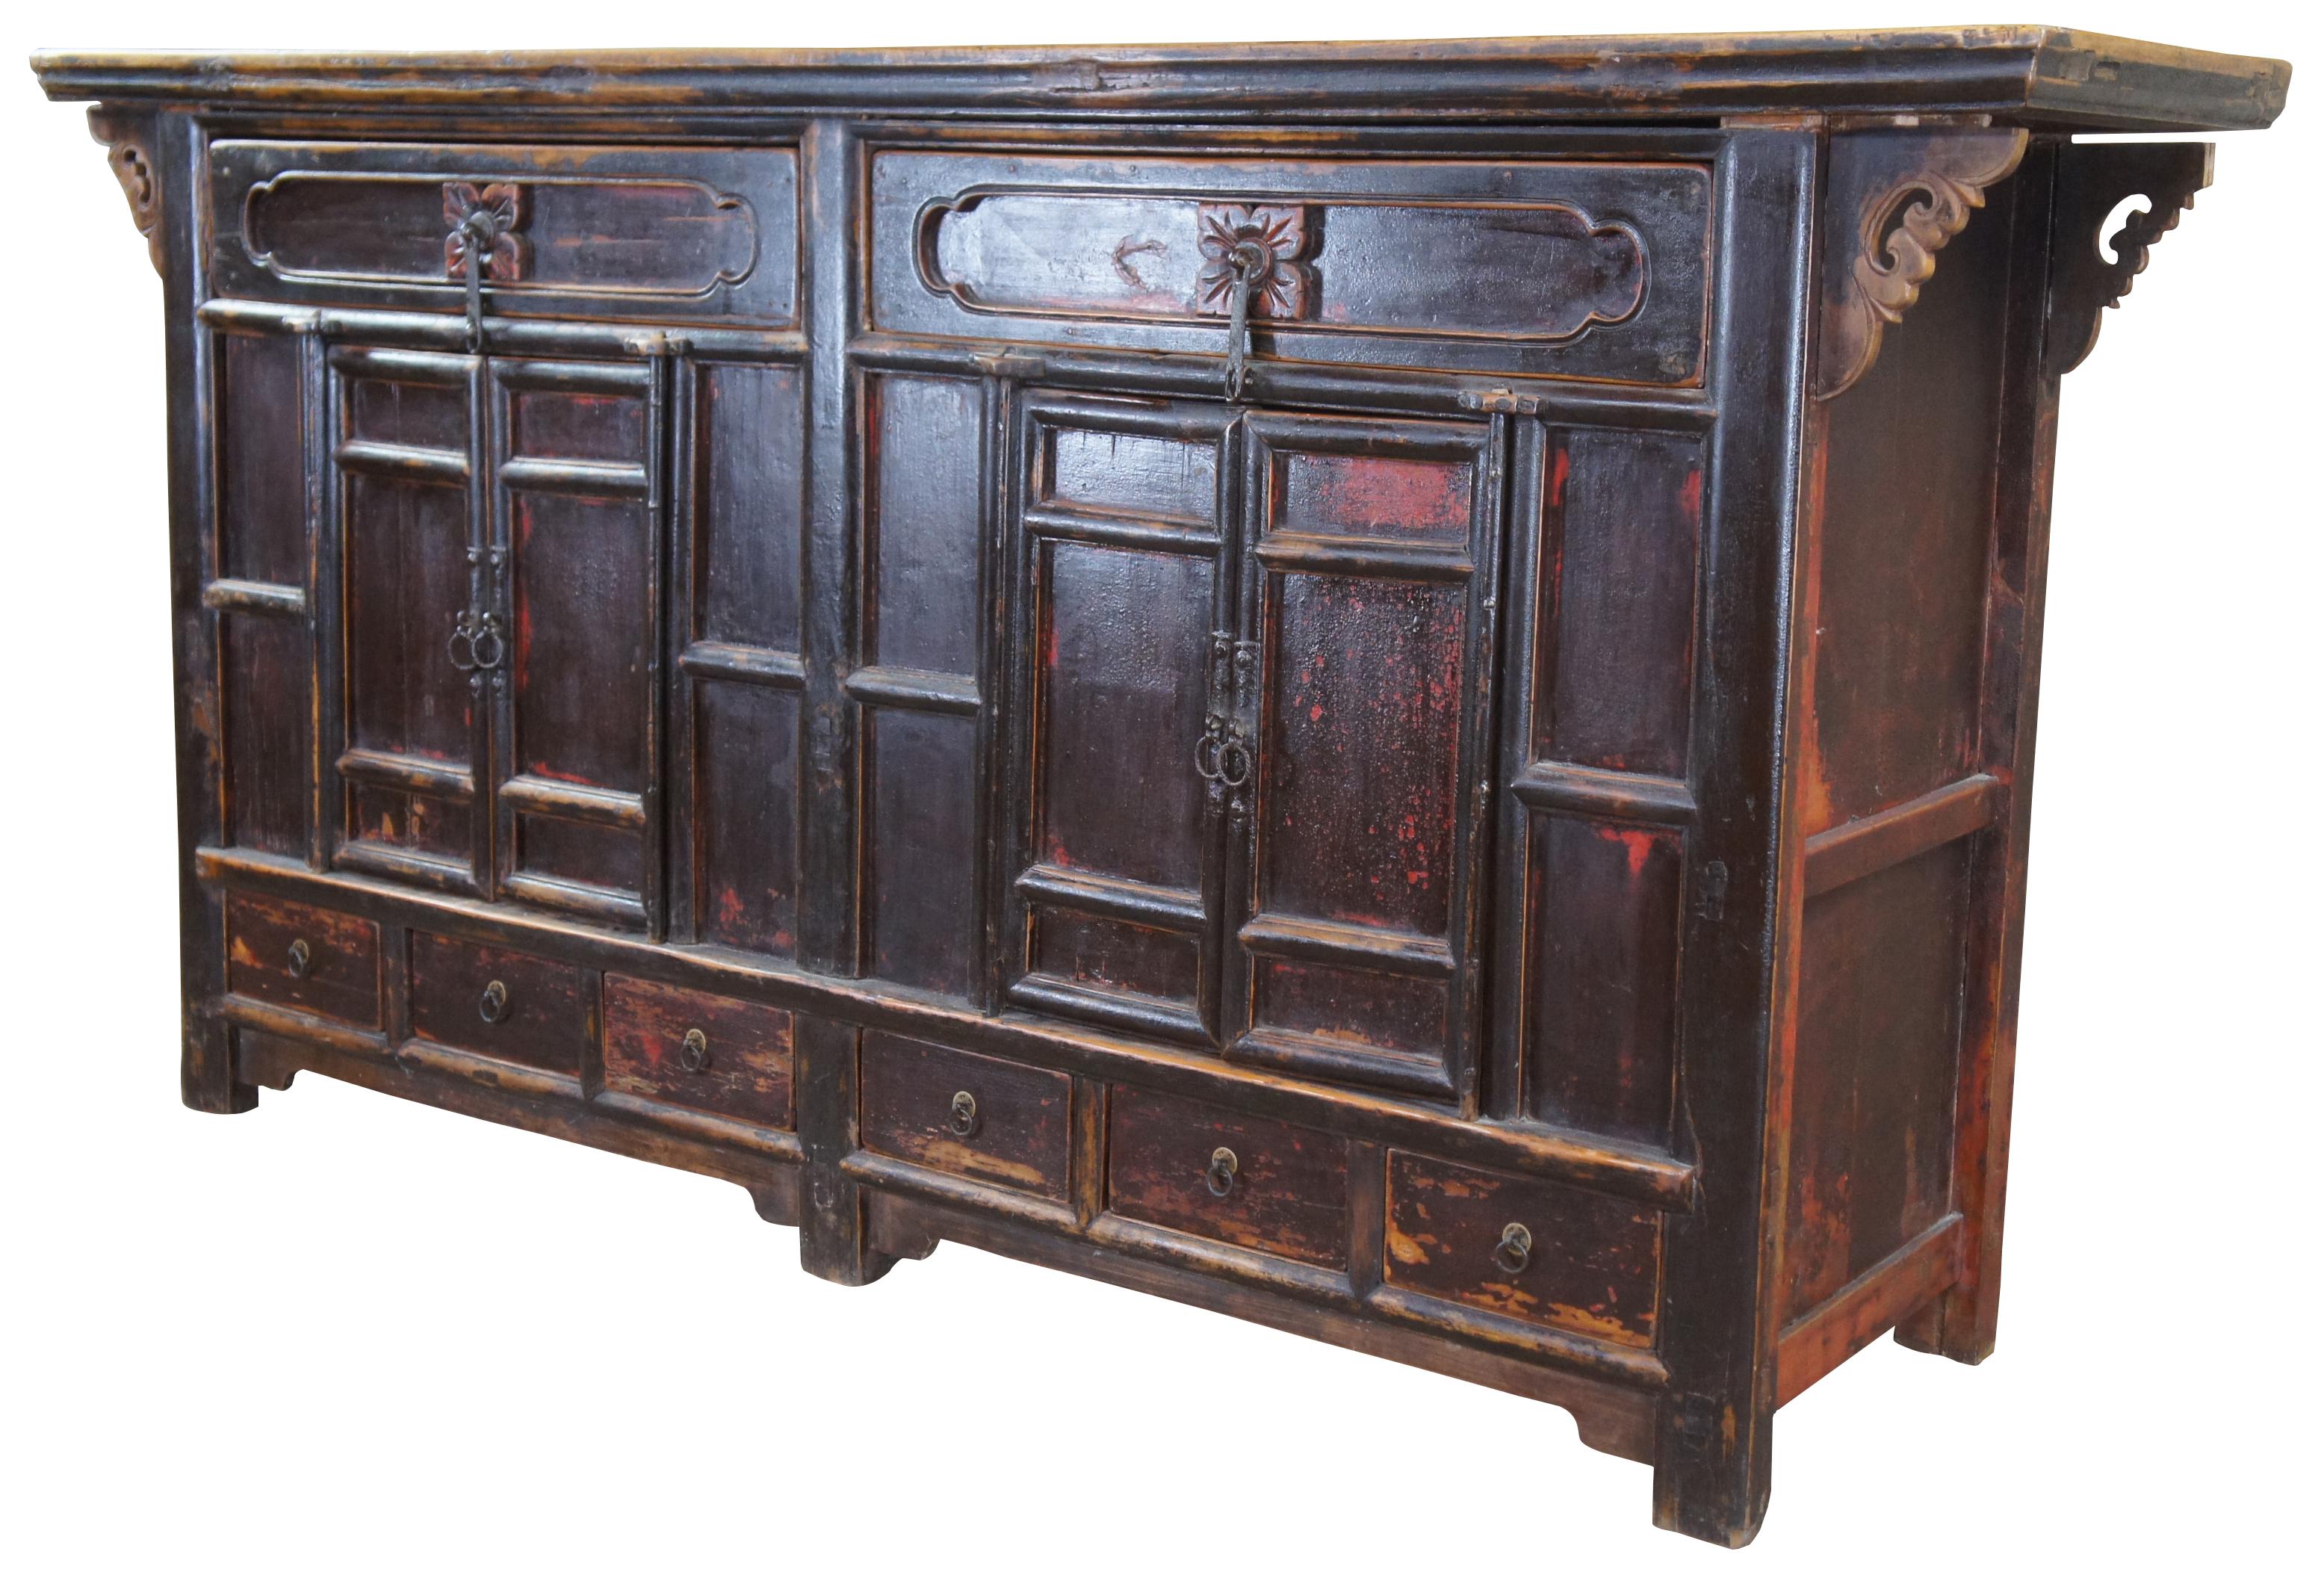 Sporting its original finish, this hand crafted buffet features a floating panel top, with cloud form spandrels, over two long drawers with cloud-form panels and carved florets. Includes two double door cabinets with rounded molding. Adding further